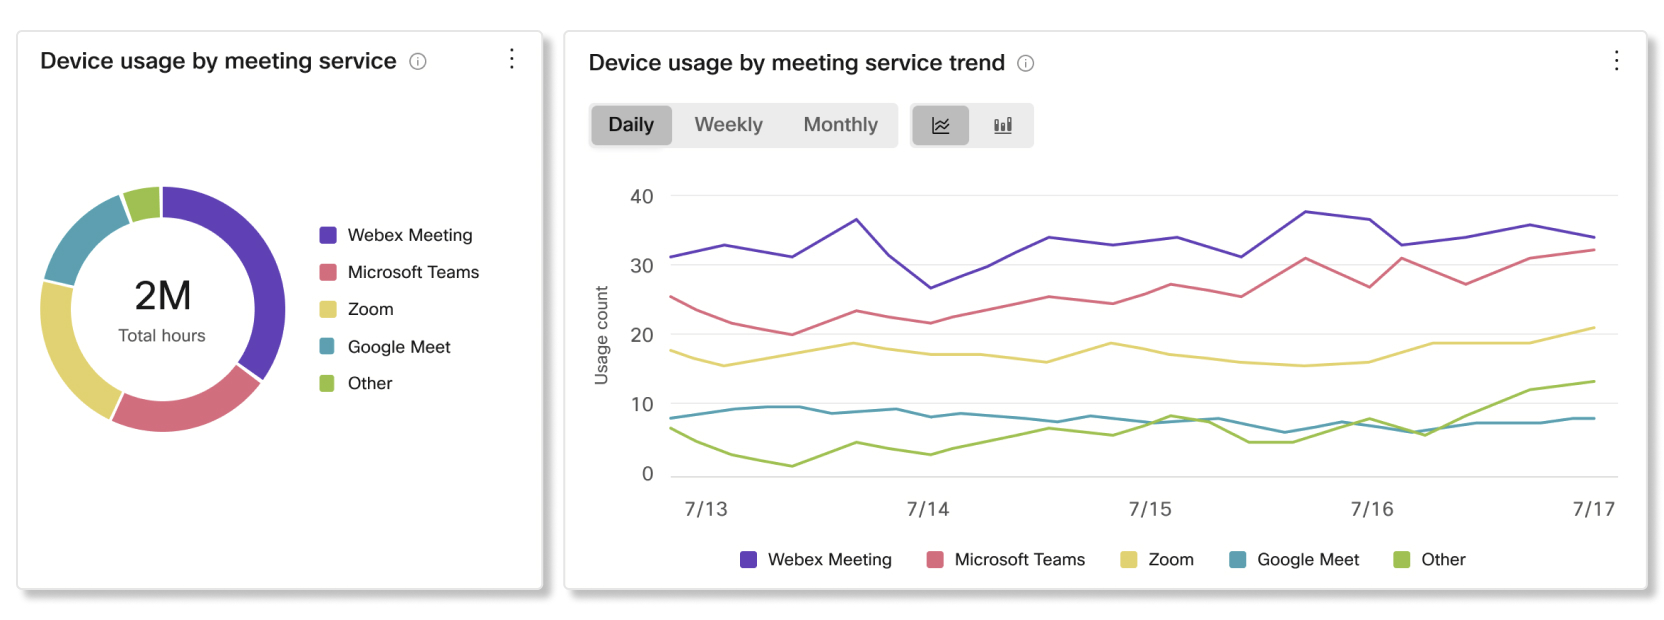 Device usage by meeting service and trend charts in devices analytics of Control Hub